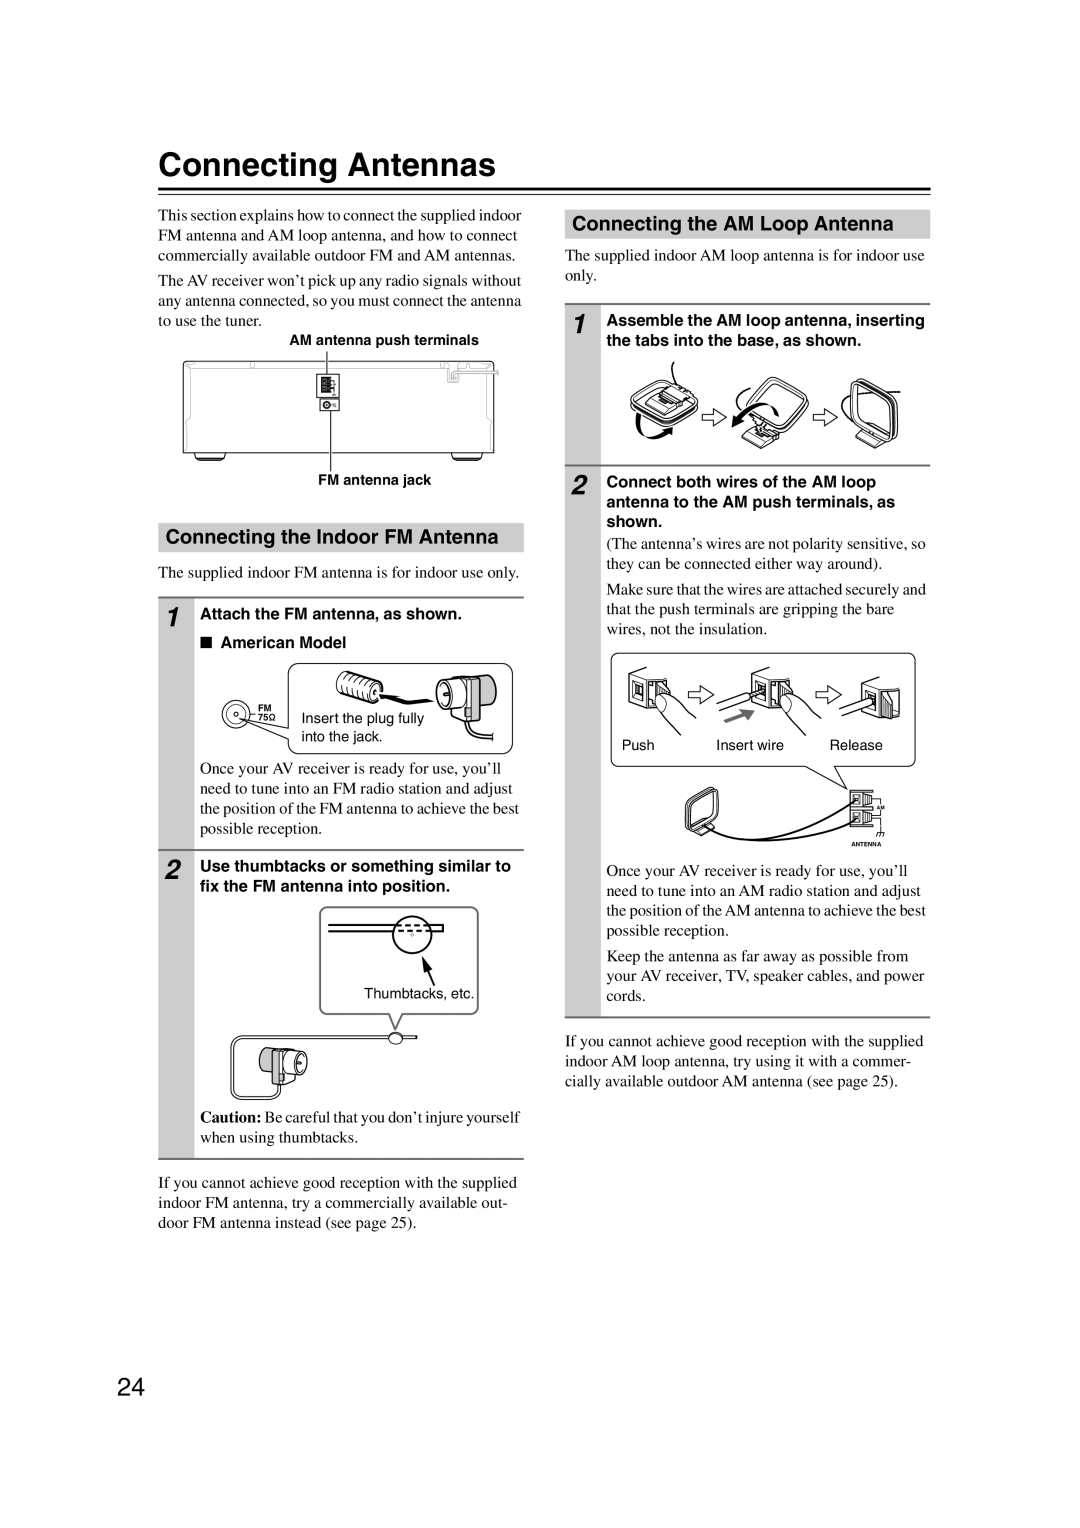 Onkyo HT-S6100 instruction manual Connecting Antennas, Connecting the AM Loop Antenna, Connecting the Indoor FM Antenna 